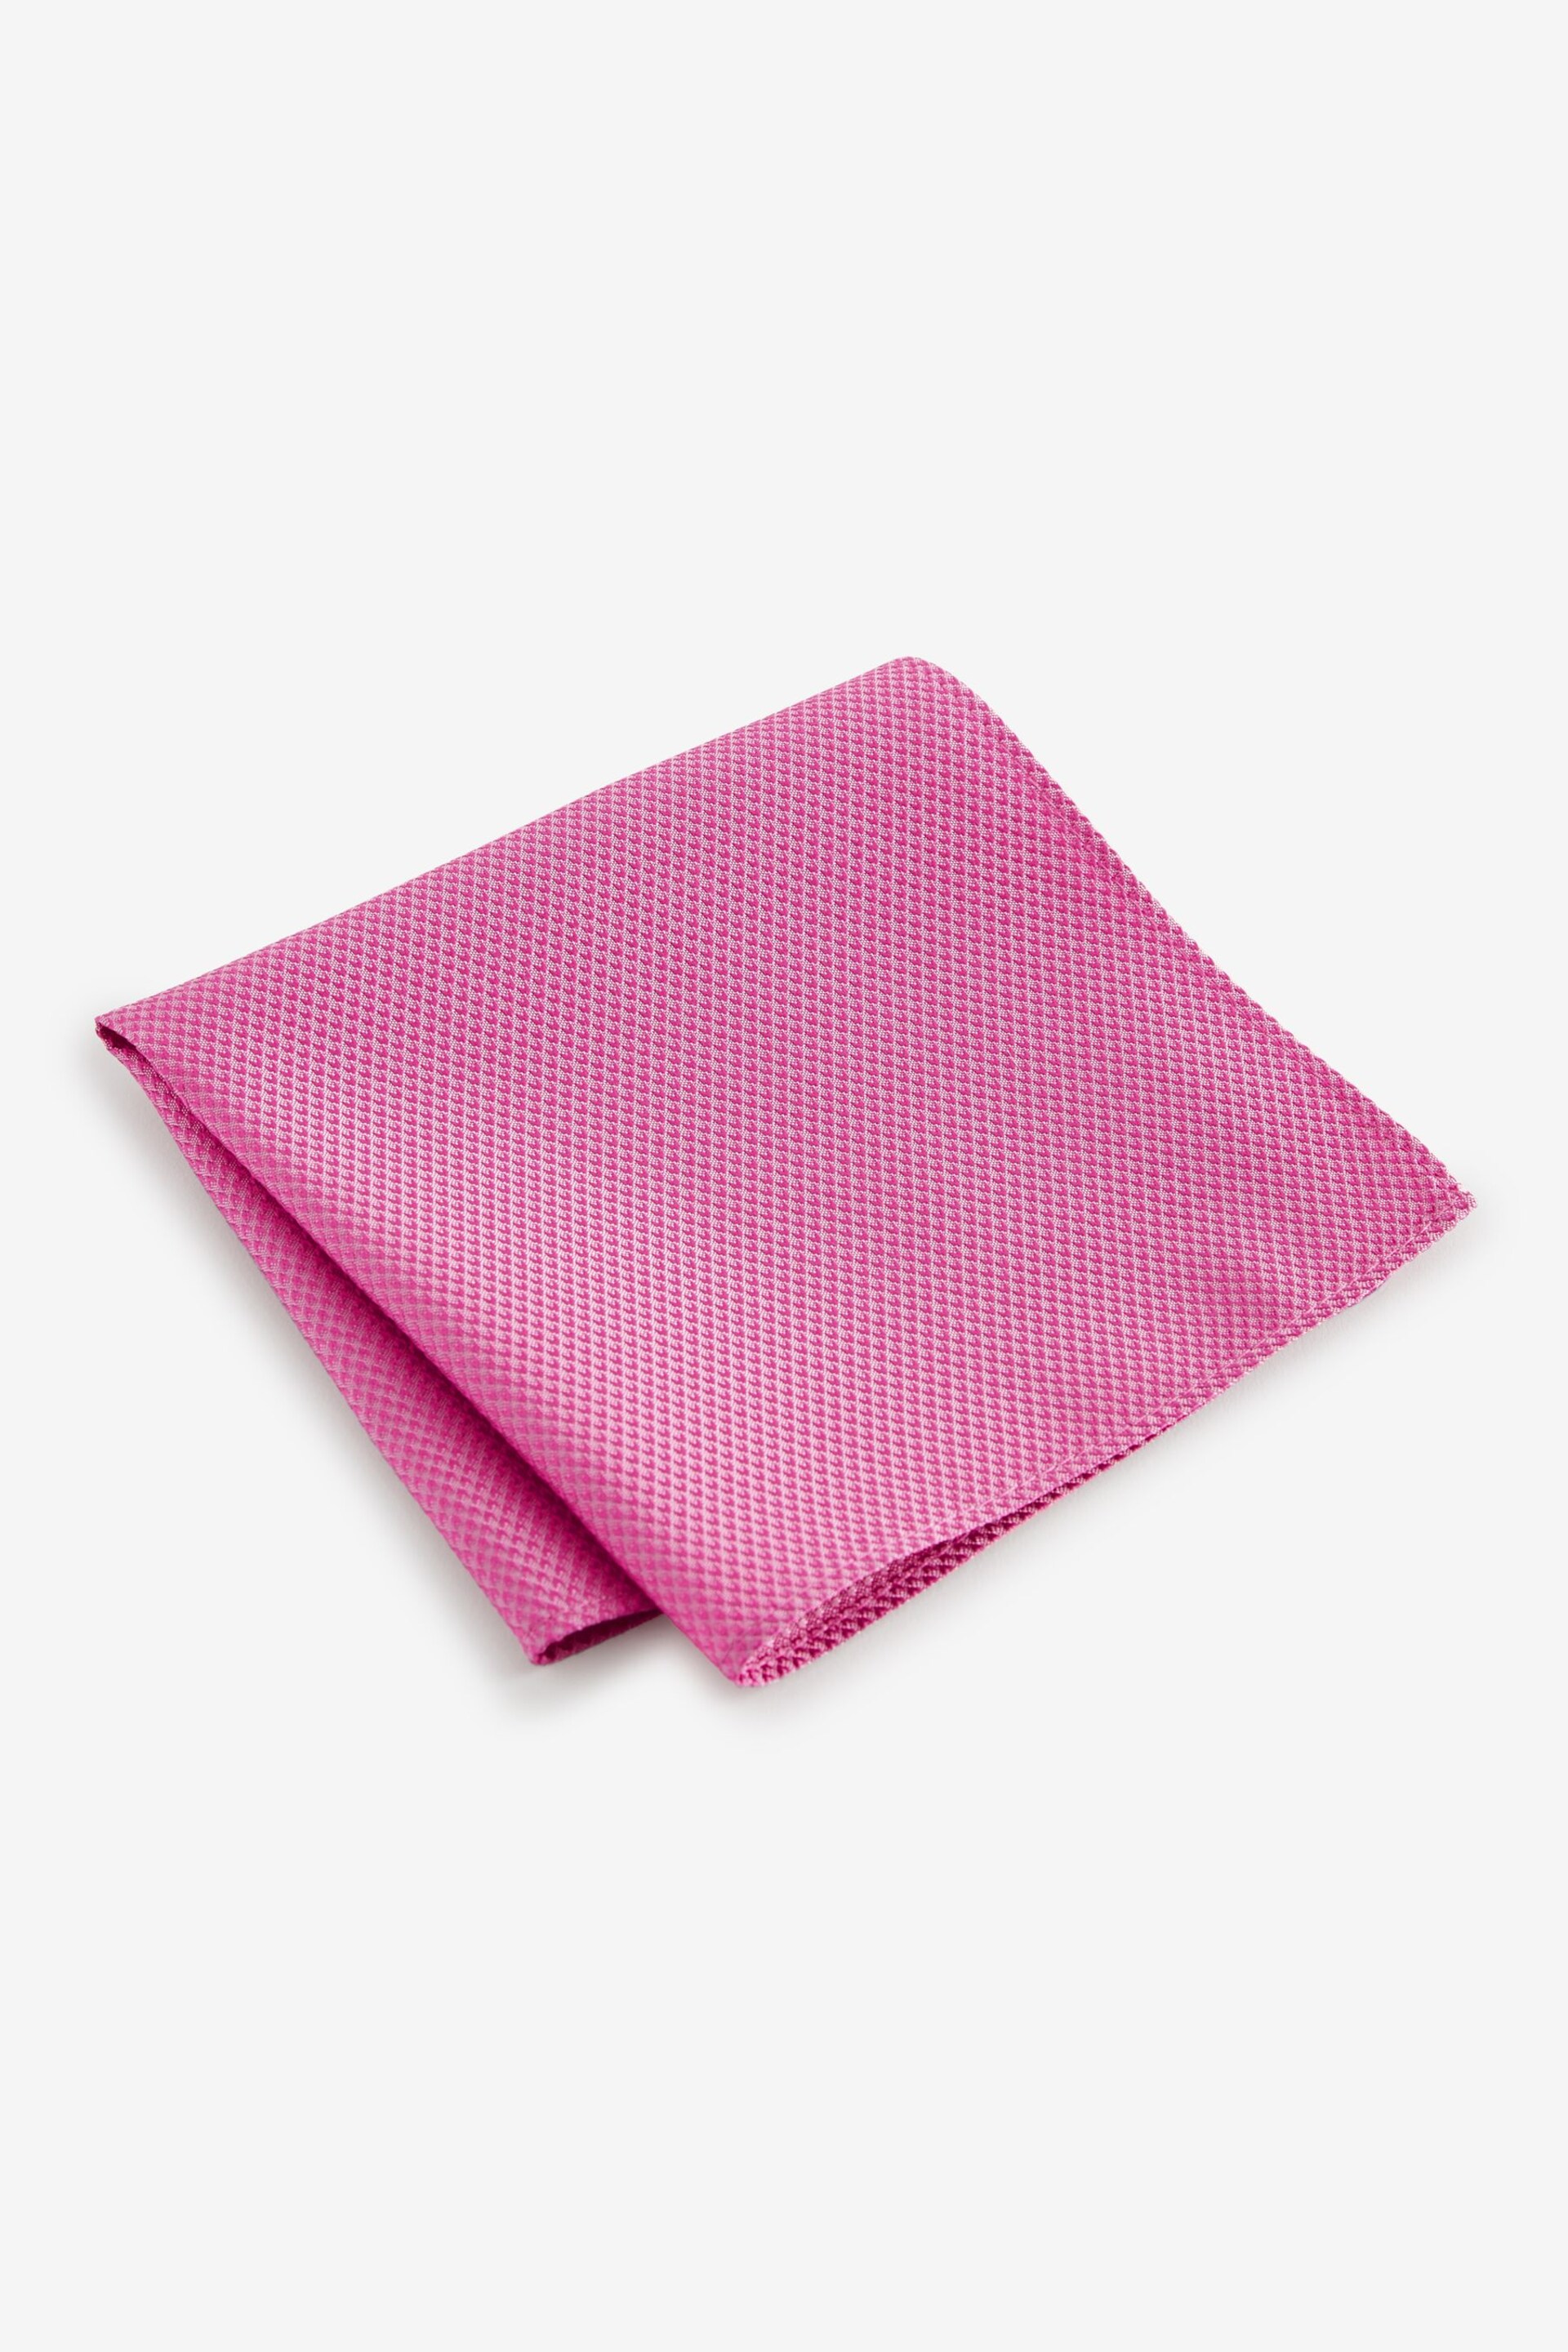 Fuchsia Pink Textured Silk Lapel Pin And Pocket Square Set - Image 2 of 4